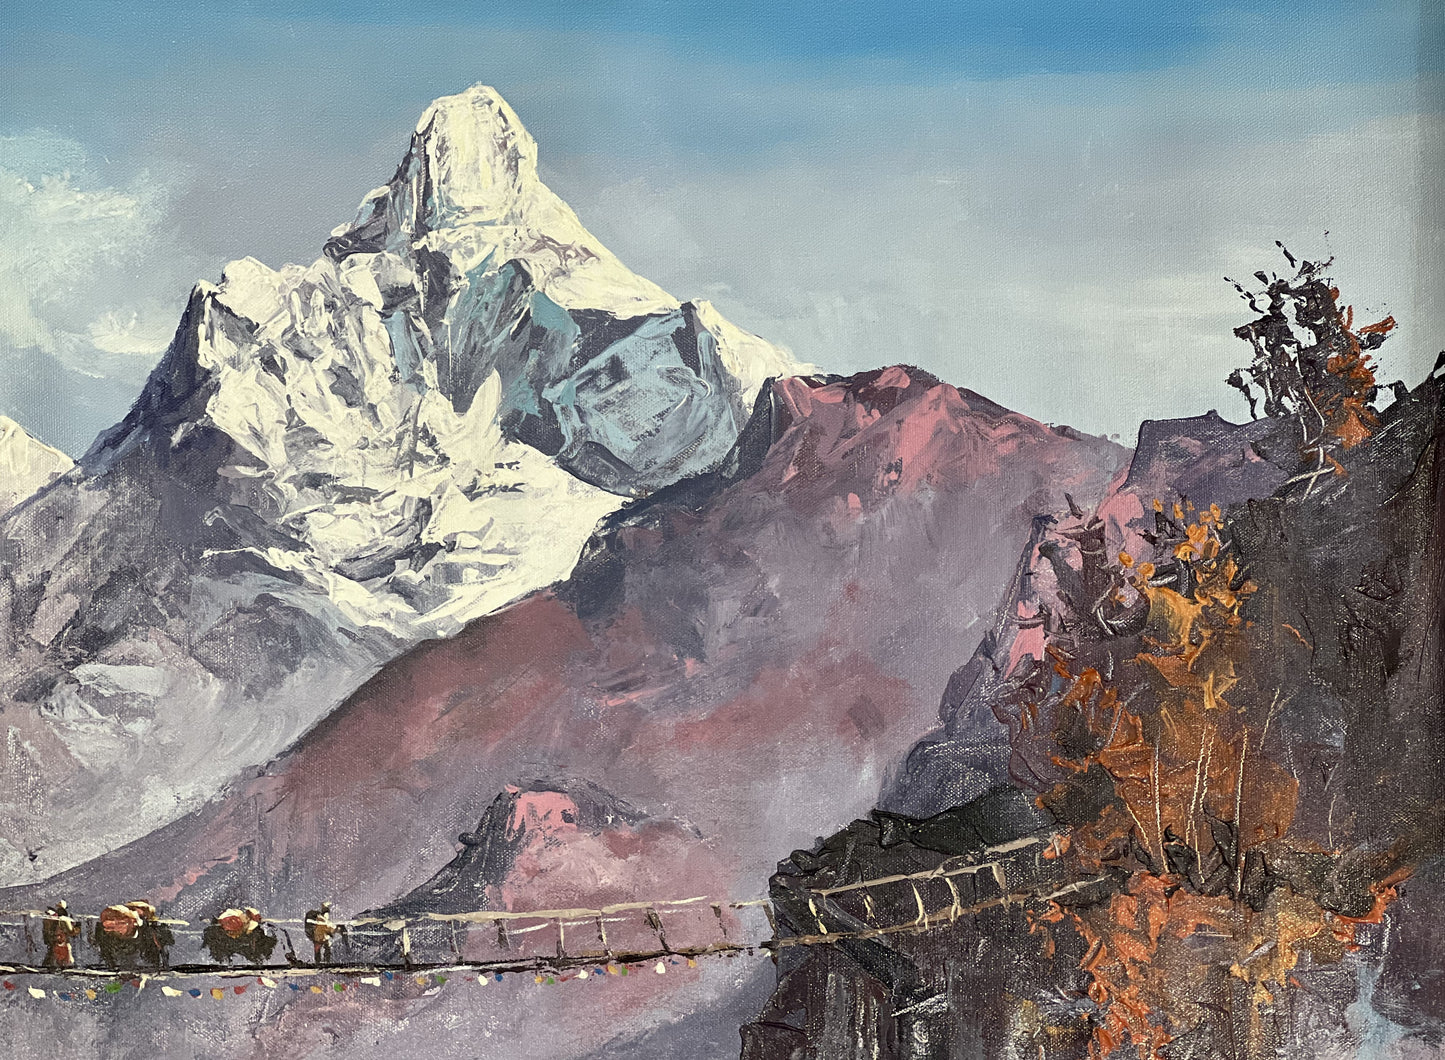 Majestic Peaks: Mount Everest and Amadablam in Nepal/ Acrylic Landscape Painting On Canvas/ High Quality Palette Knife Painting